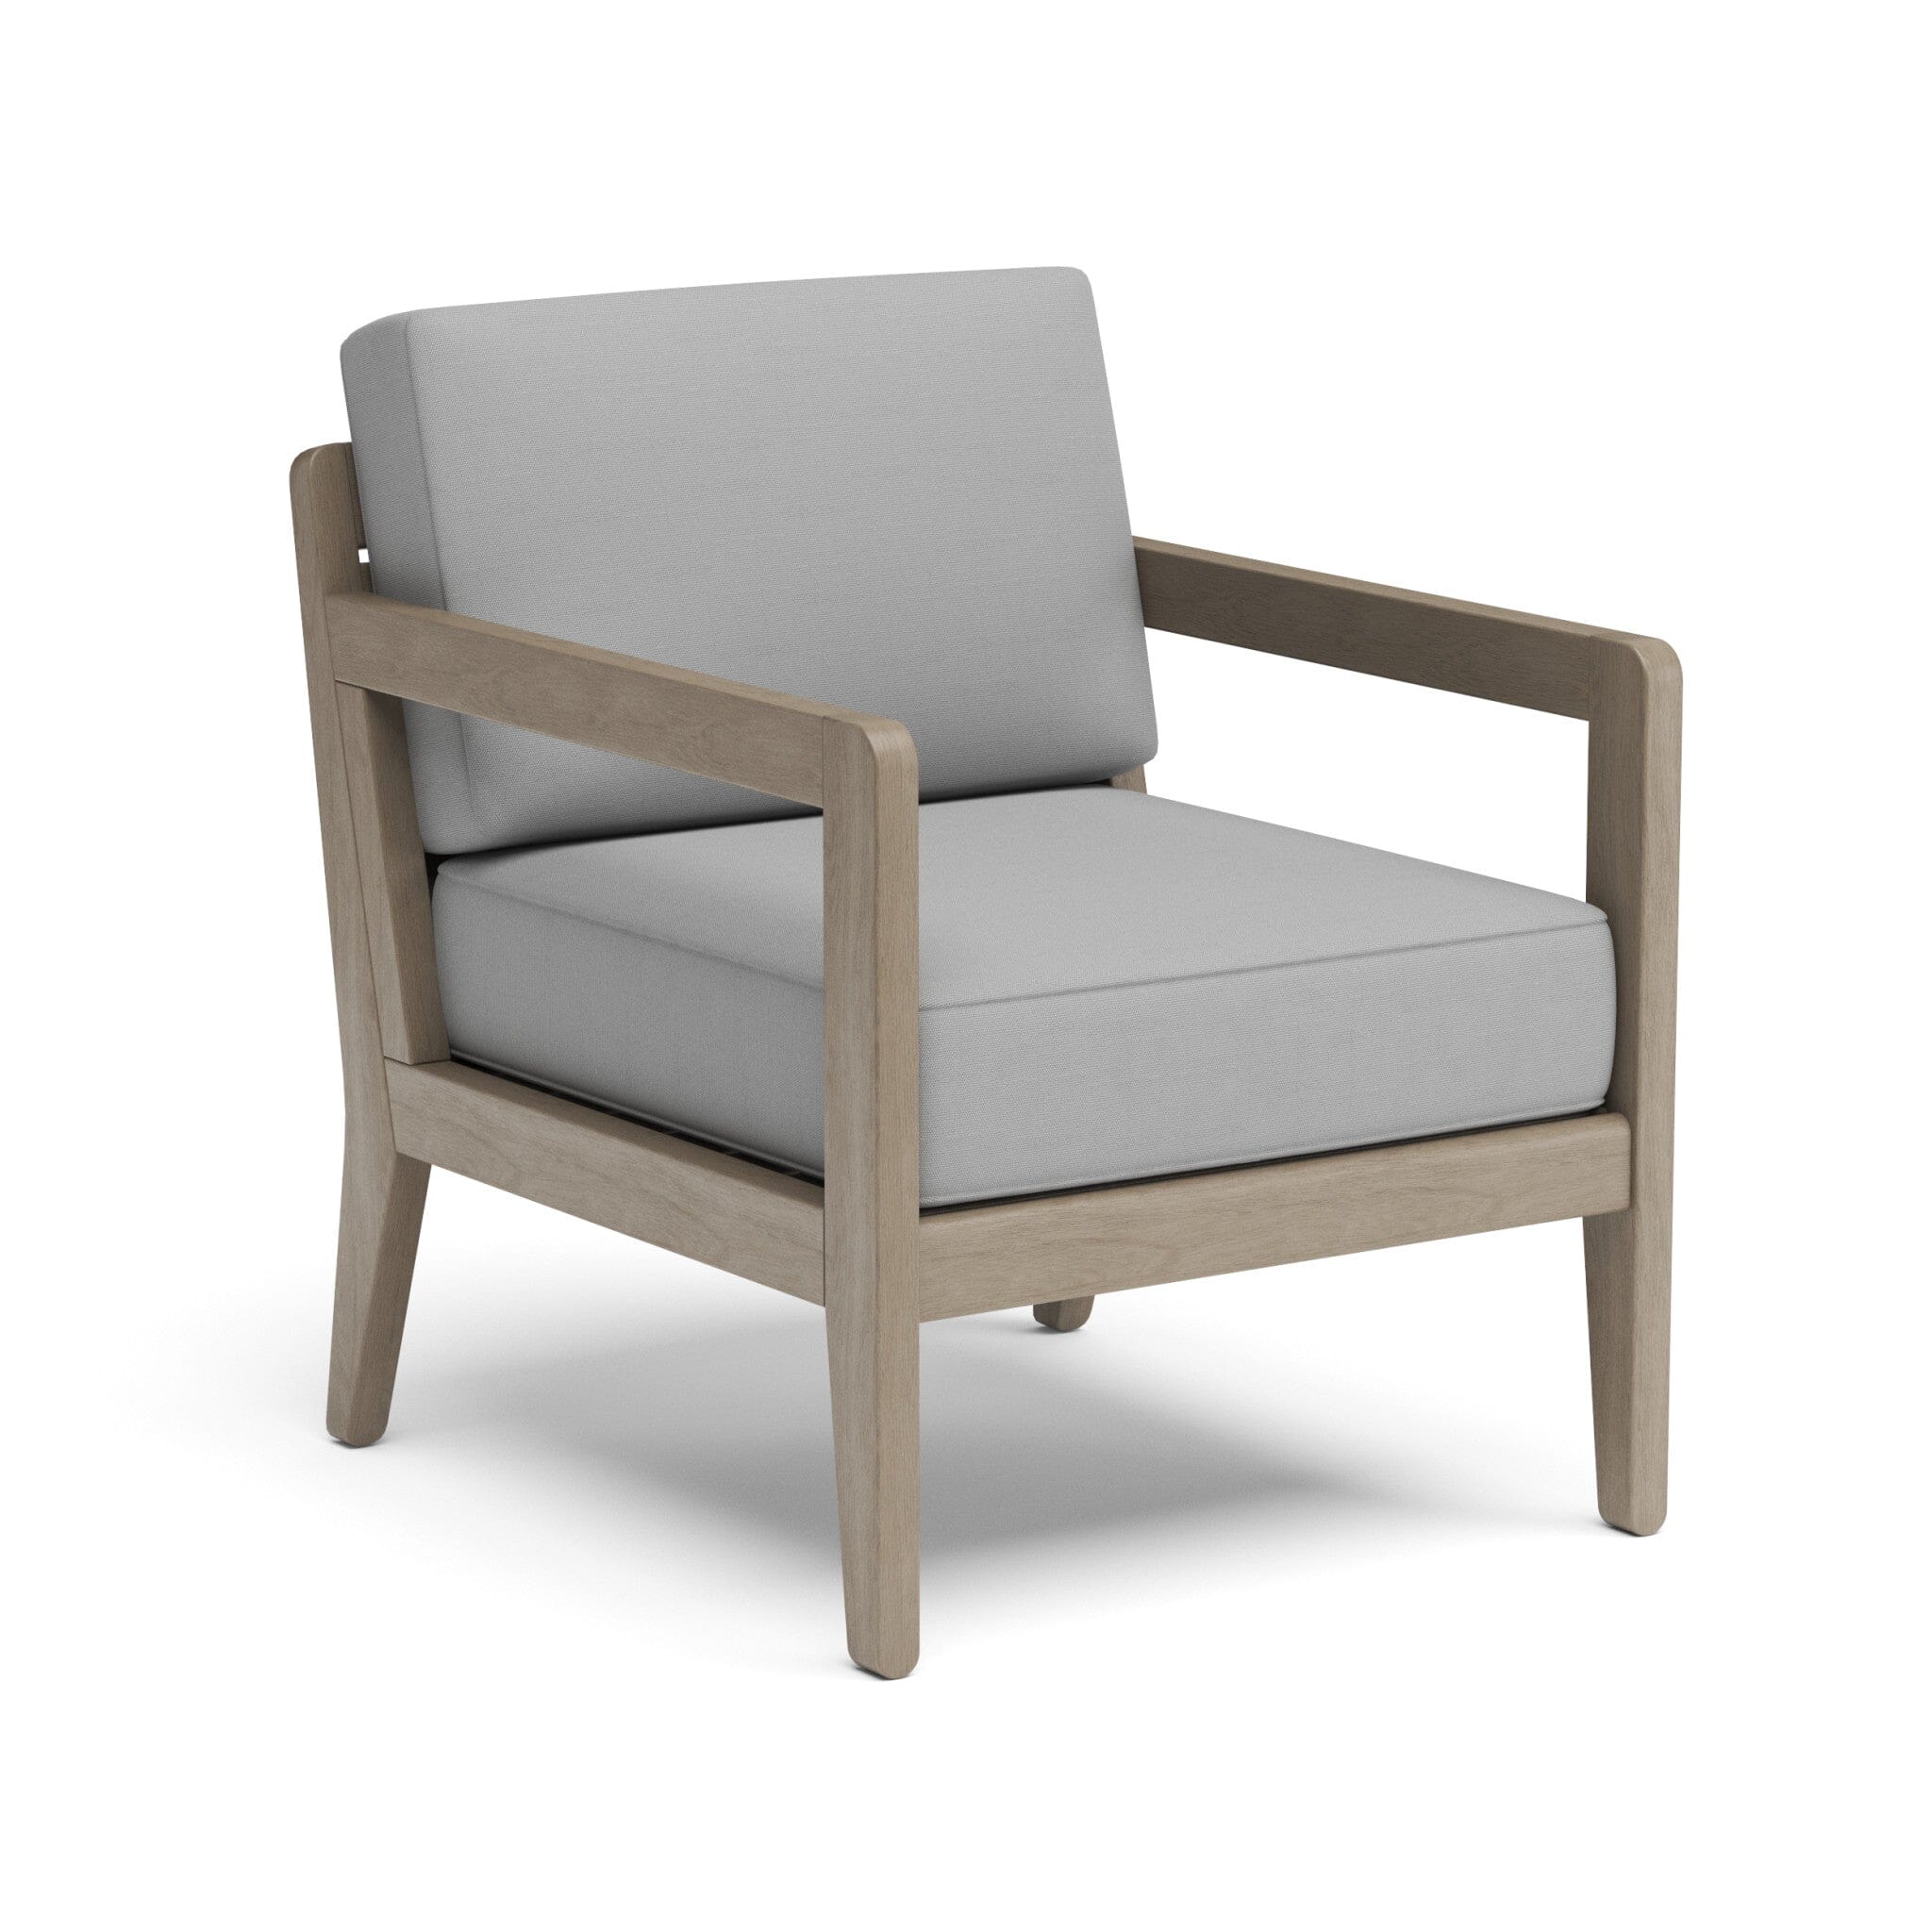 Transitional Outdoor Lounge Armchair By Sustain Outdoor Chair Sustain